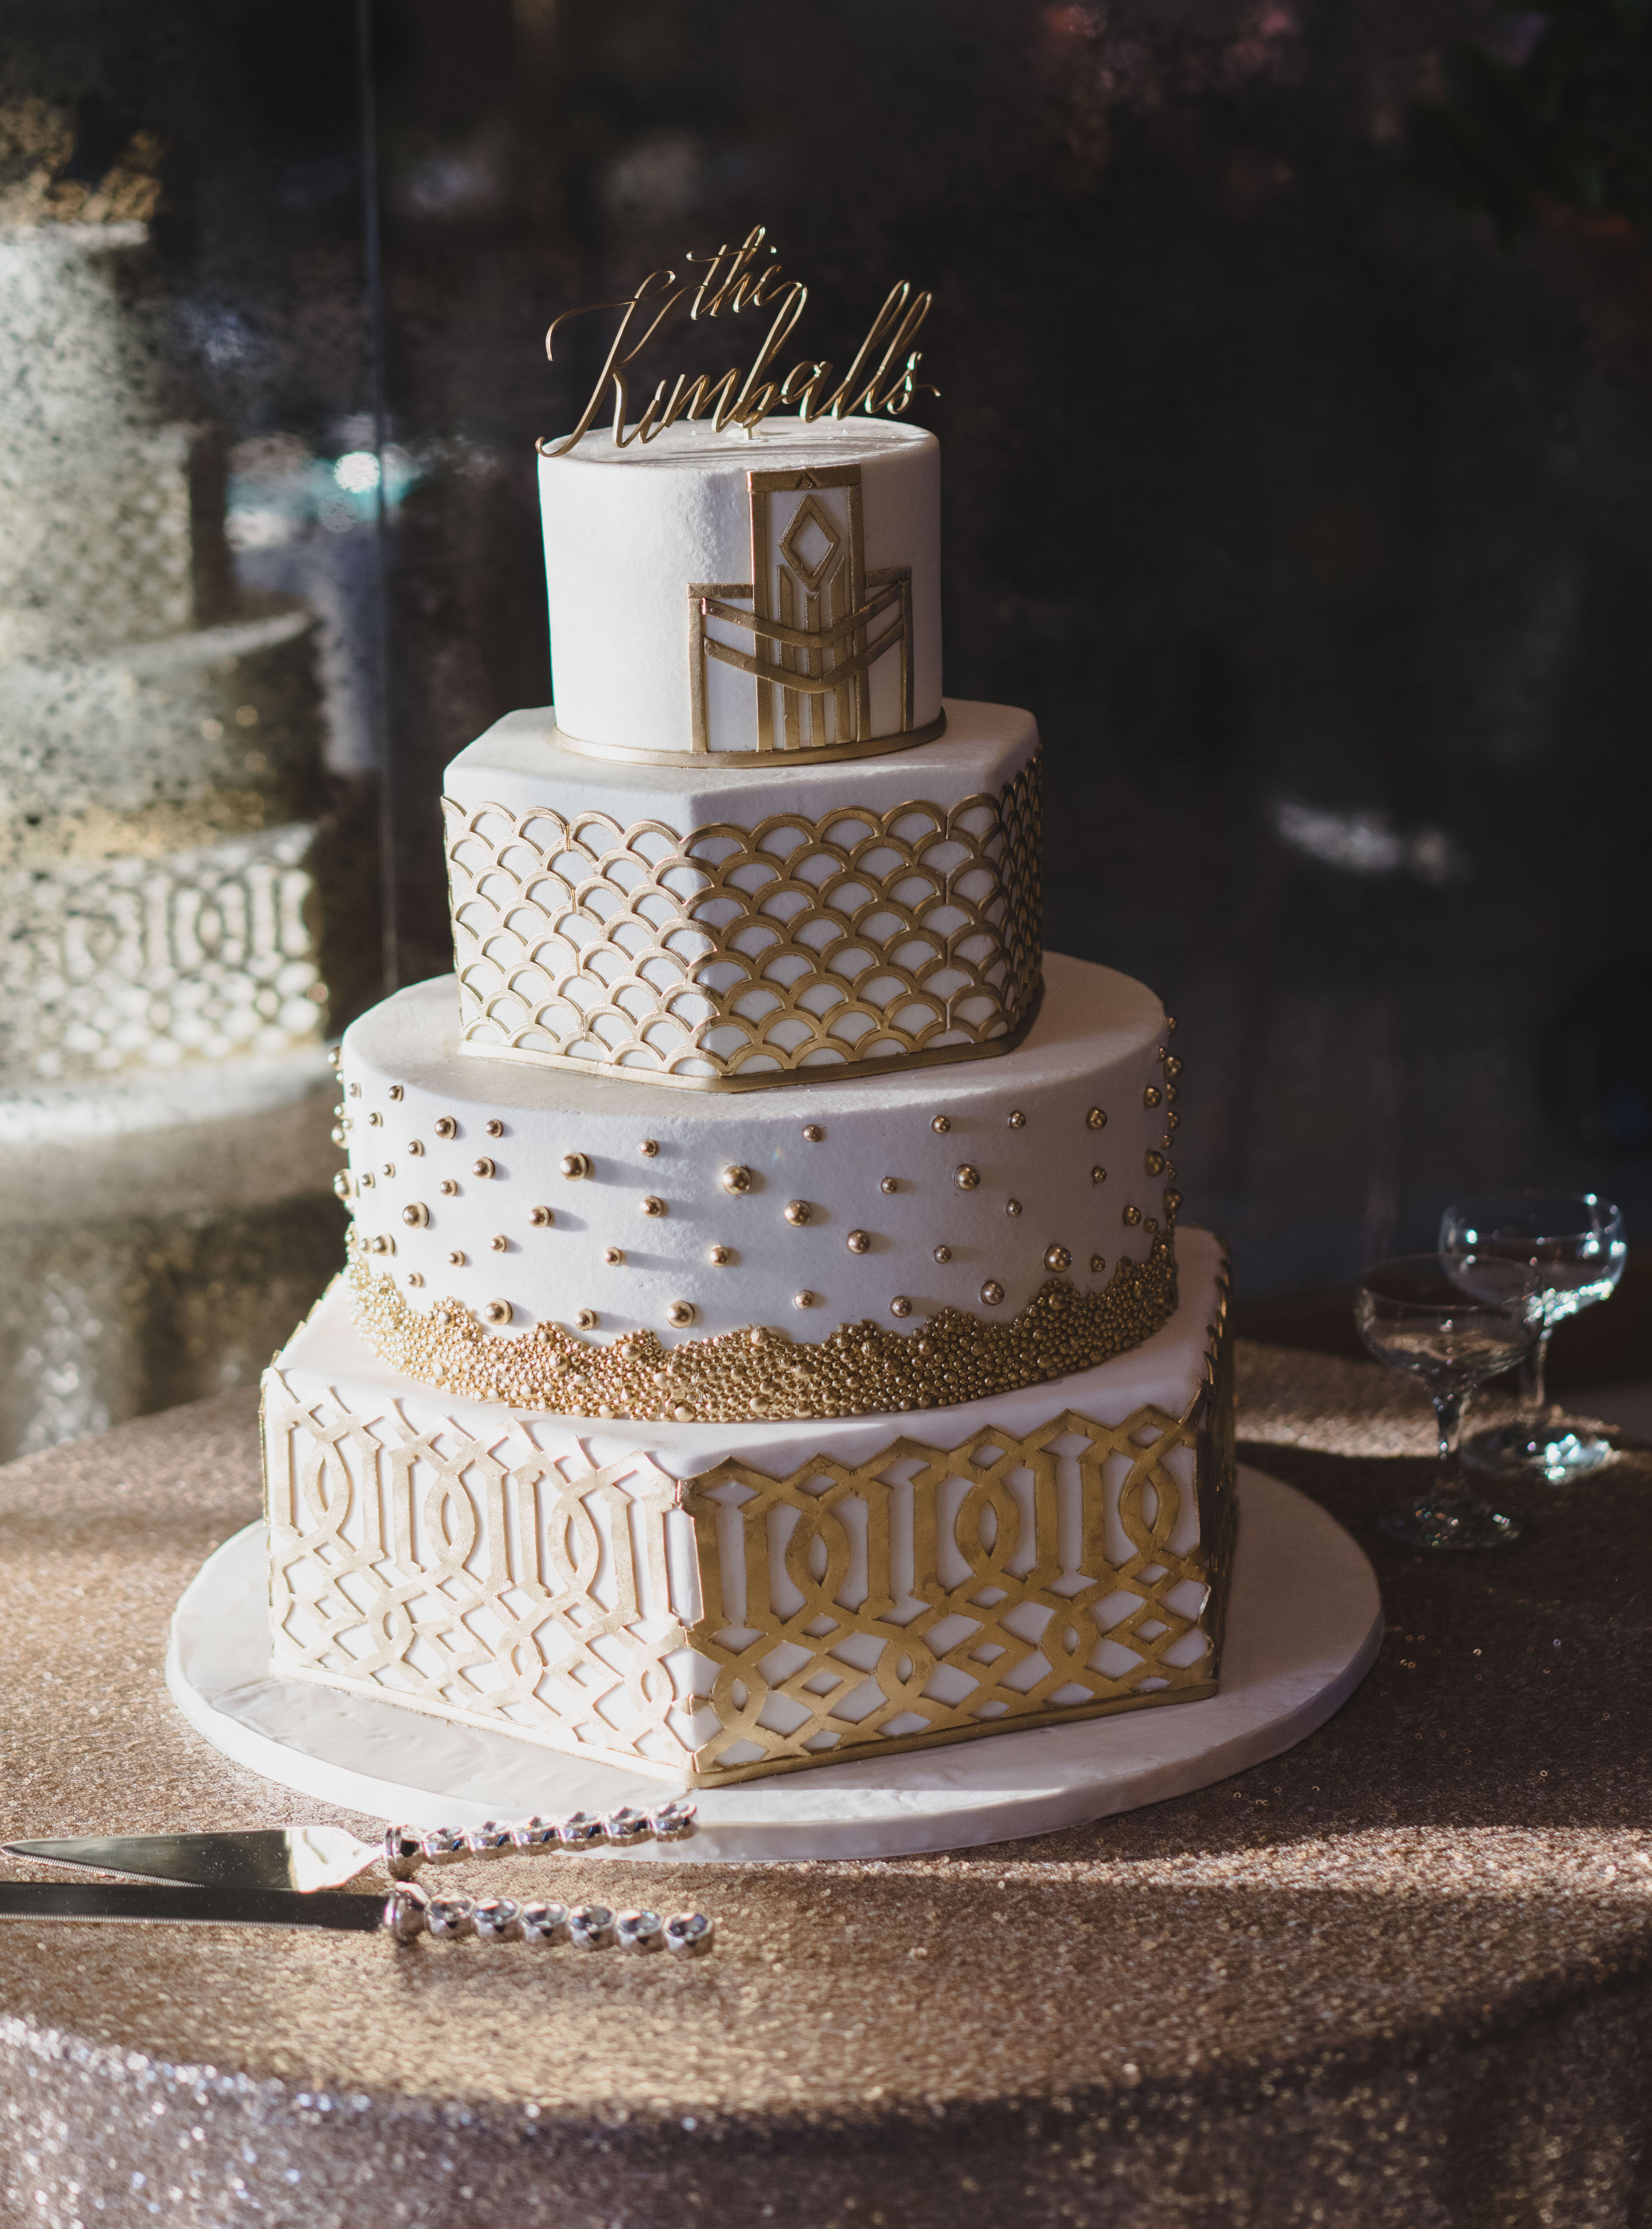 A 1920's-inspired 4-tier wedding cake designed by Susie's Cakes for a wedding in Houston.